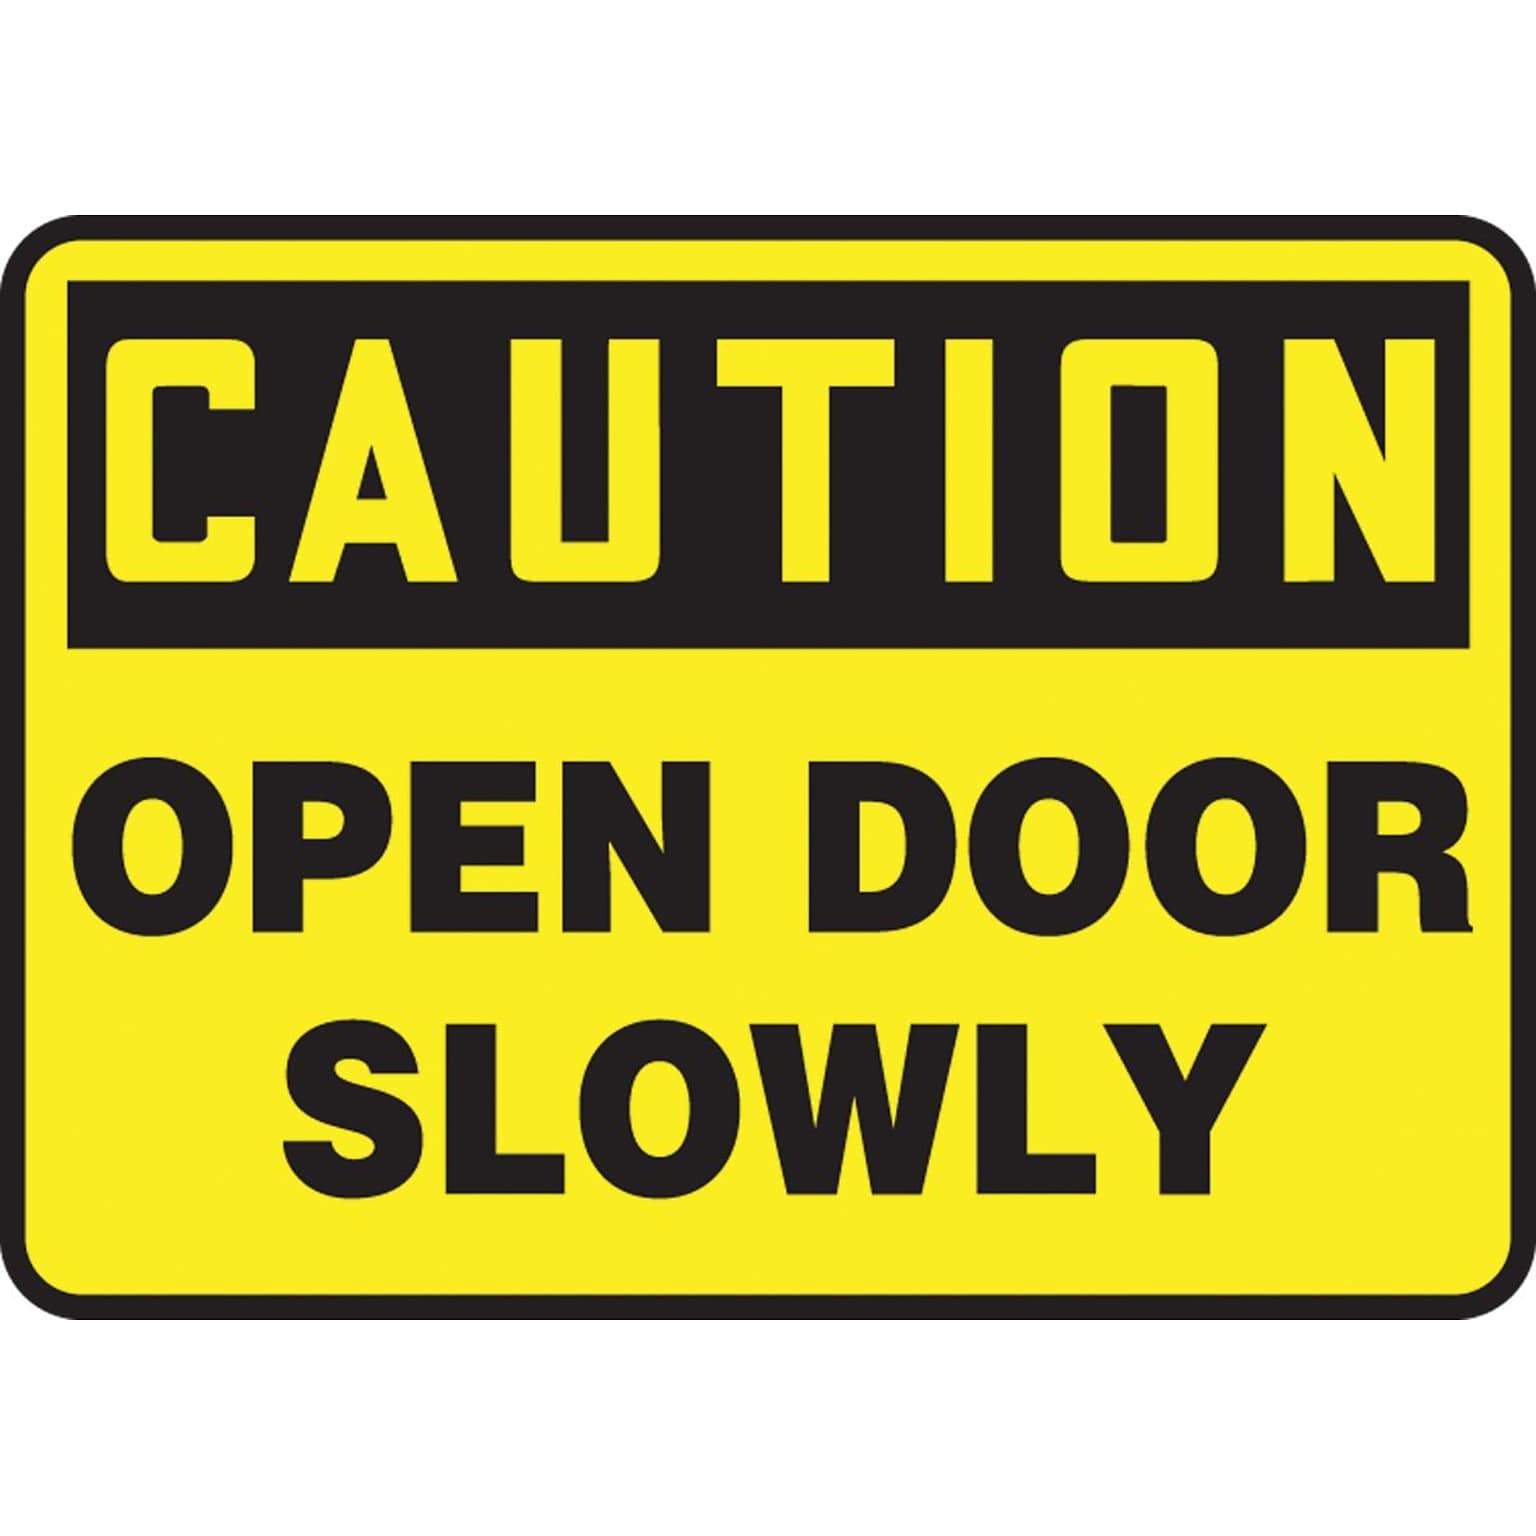 Accuform 7 x 10 Vinyl Safety Sign CAUTION OPEN DOOR SLOWLY, Black On Yellow (MABR603VS)